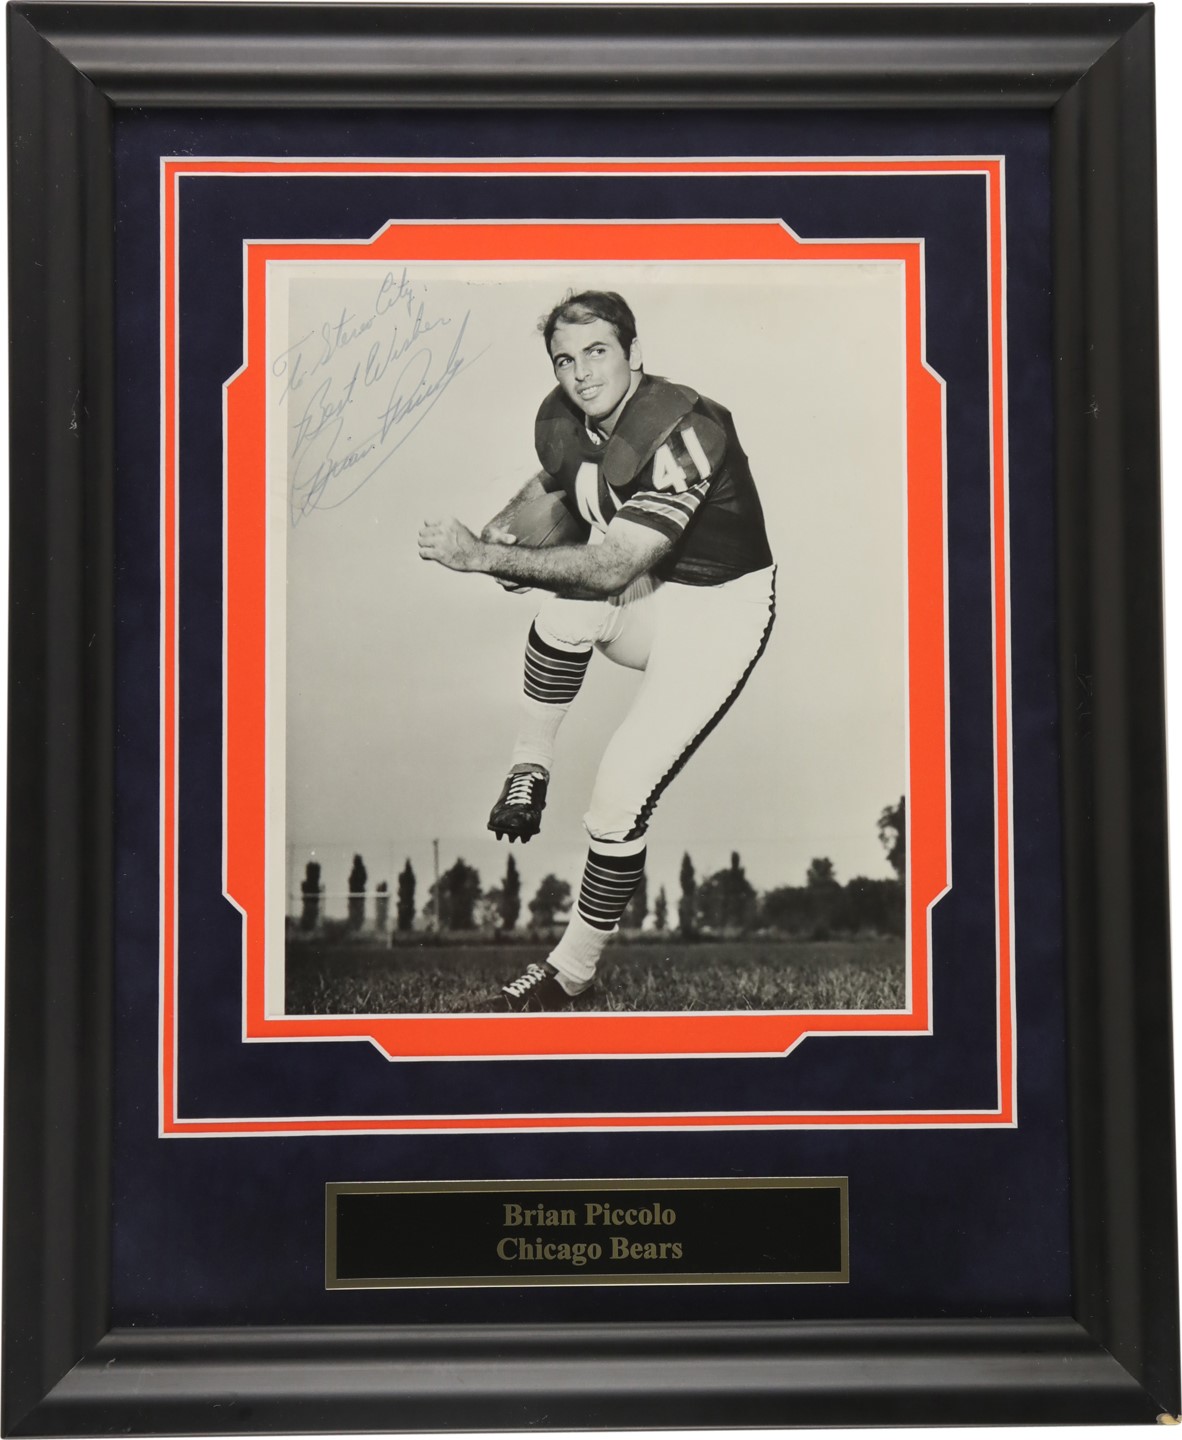 - Brian Piccolo Signed Chicago Bears Photograph